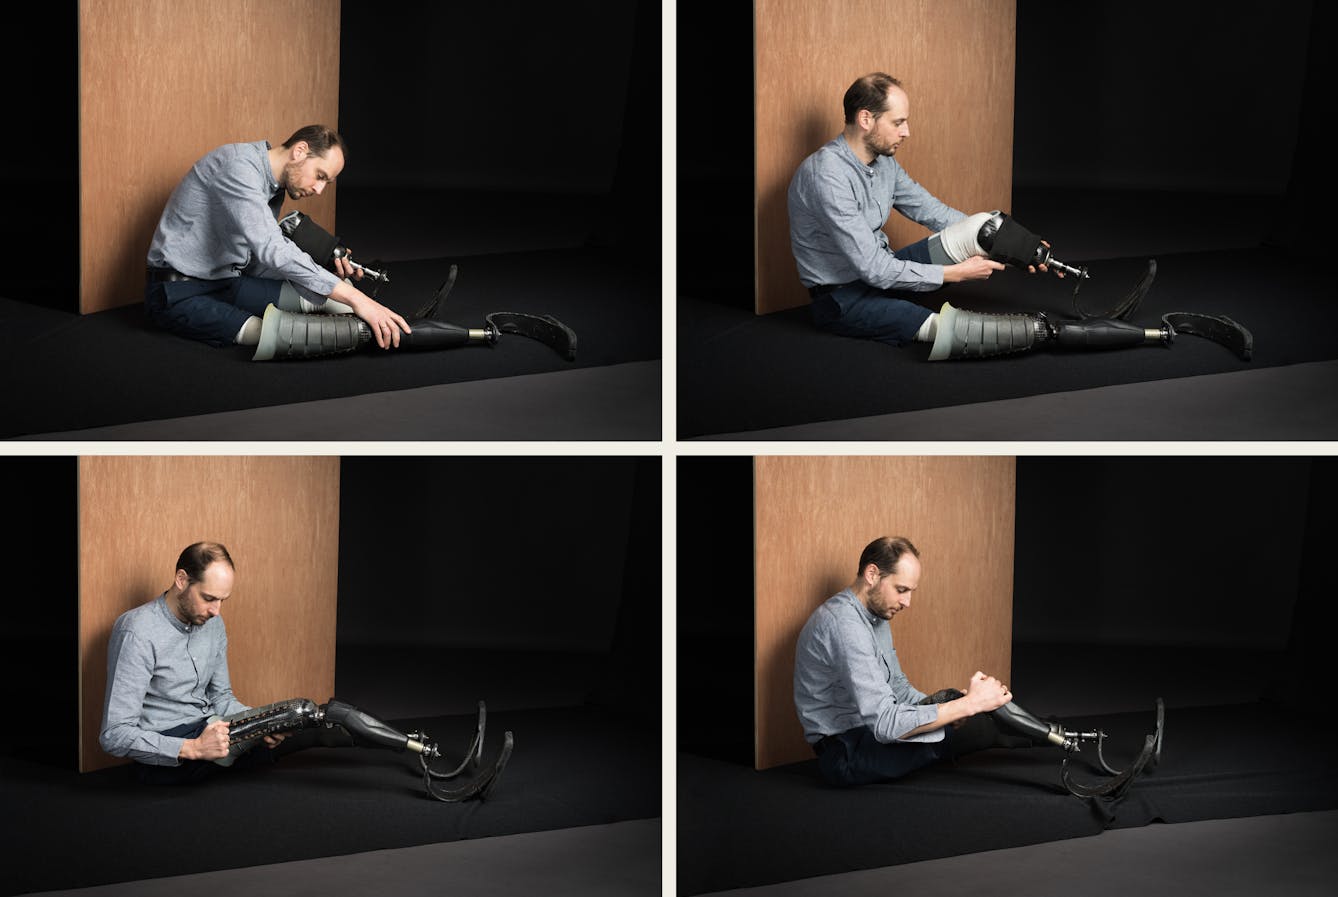 Image made up of four photographs. 

The top left photograph shows Harry Parker wearing a grey shirt and jeans, sat on a black mat on the floor. He has short brown hair and a beard. There is a wood panel behind him. He is slightly bent over and holding his prosthetic limbs. 

The top right photograph shows Harry Parker in the same setting, he is sat up and holding his left prosthetic limb. 

The top right photograph shows Harry Parker in the same setting, he is sat up and holding his left prosthetic limb. 

The bottom left photograph shows Harry Parker in the same setting, he is holding his left prosthetic limb. 

The bottom right image shows Harry Parker in the same setting. His head is bent and he is holding his right prosthetic limb. 